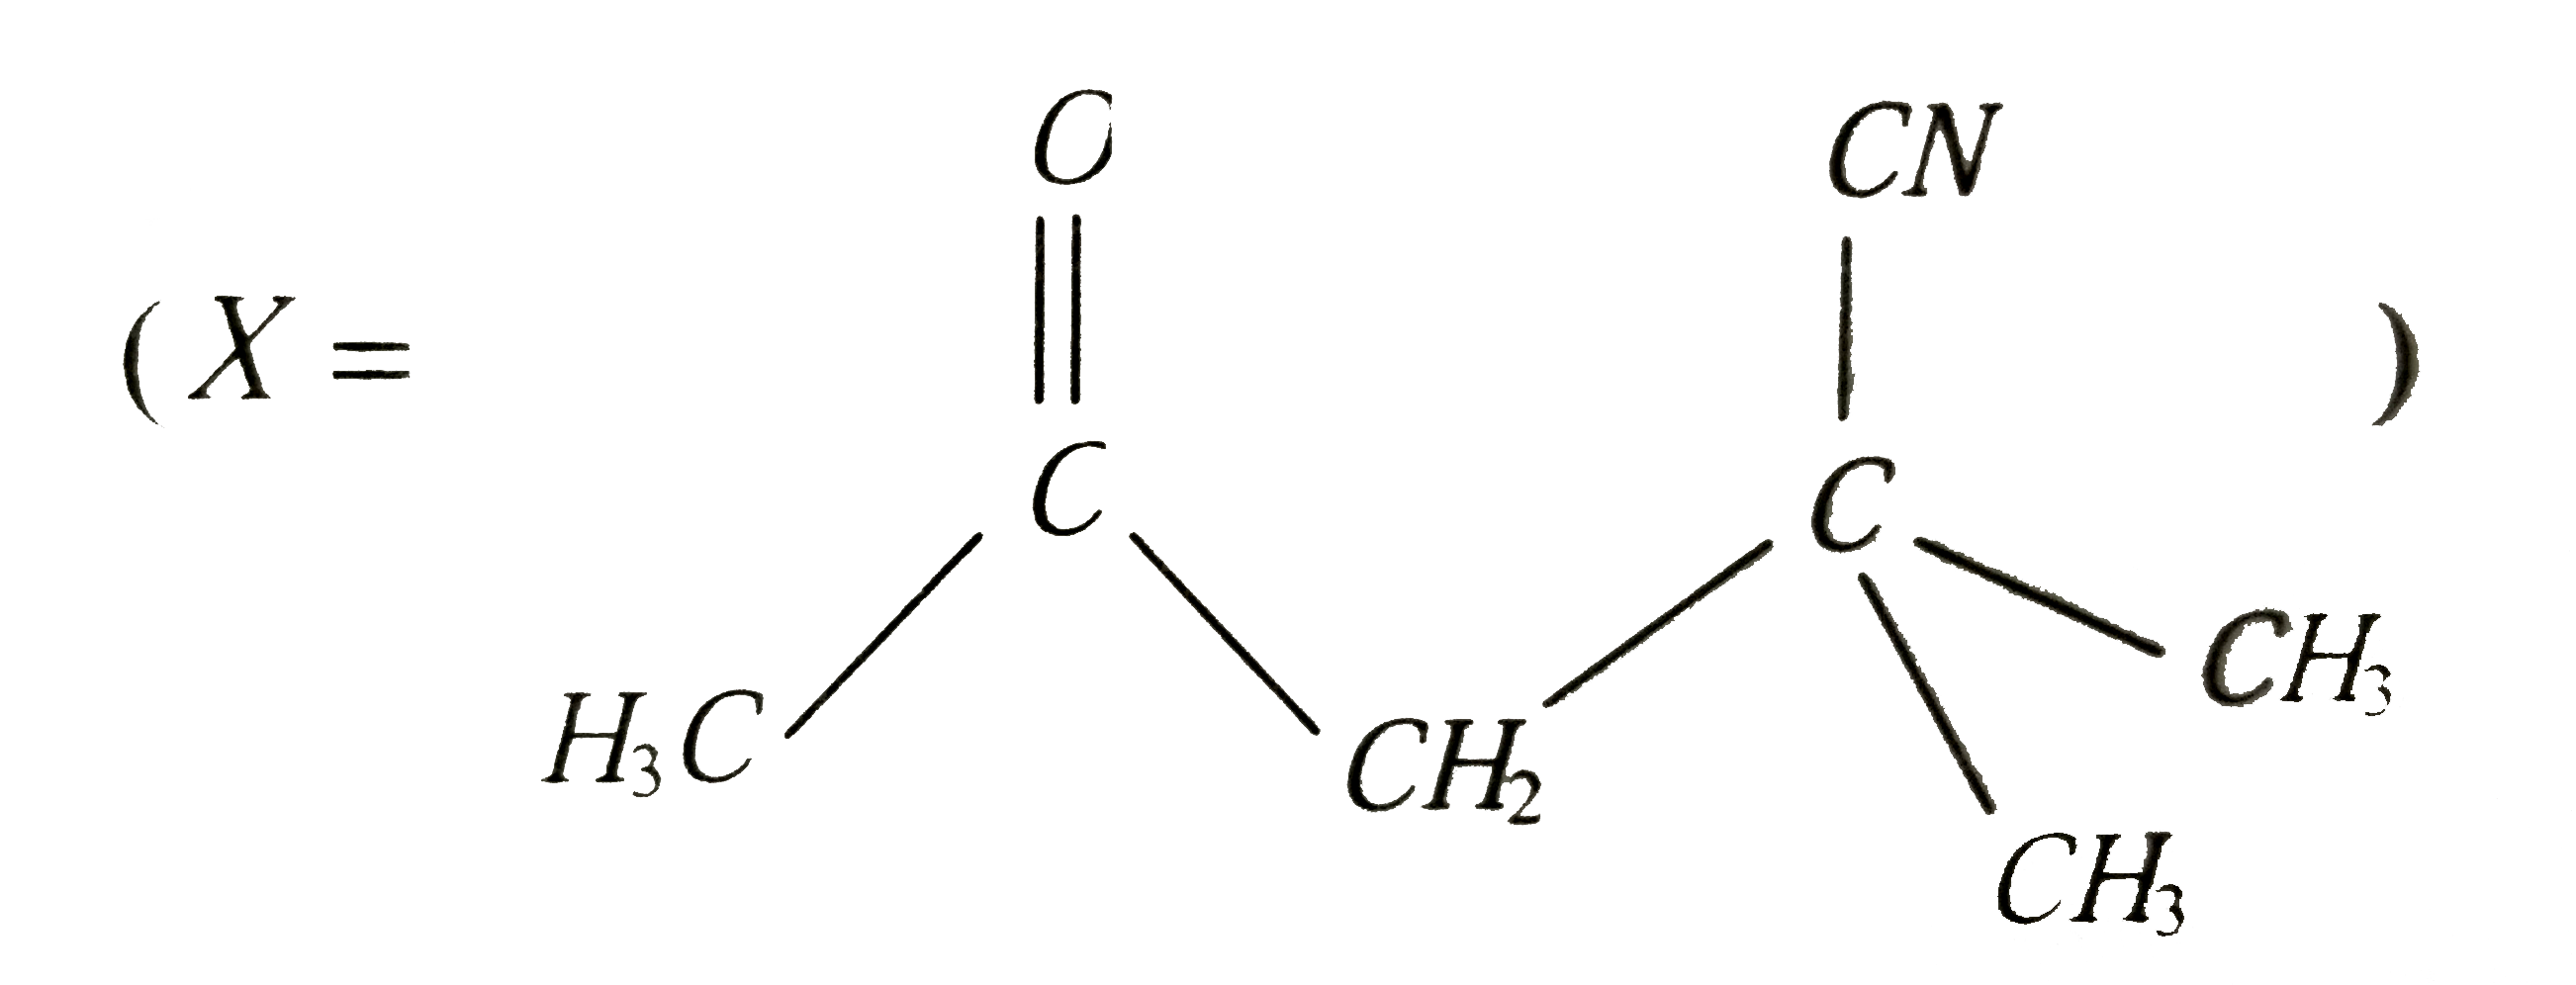 The IUPAC name of the compound X is